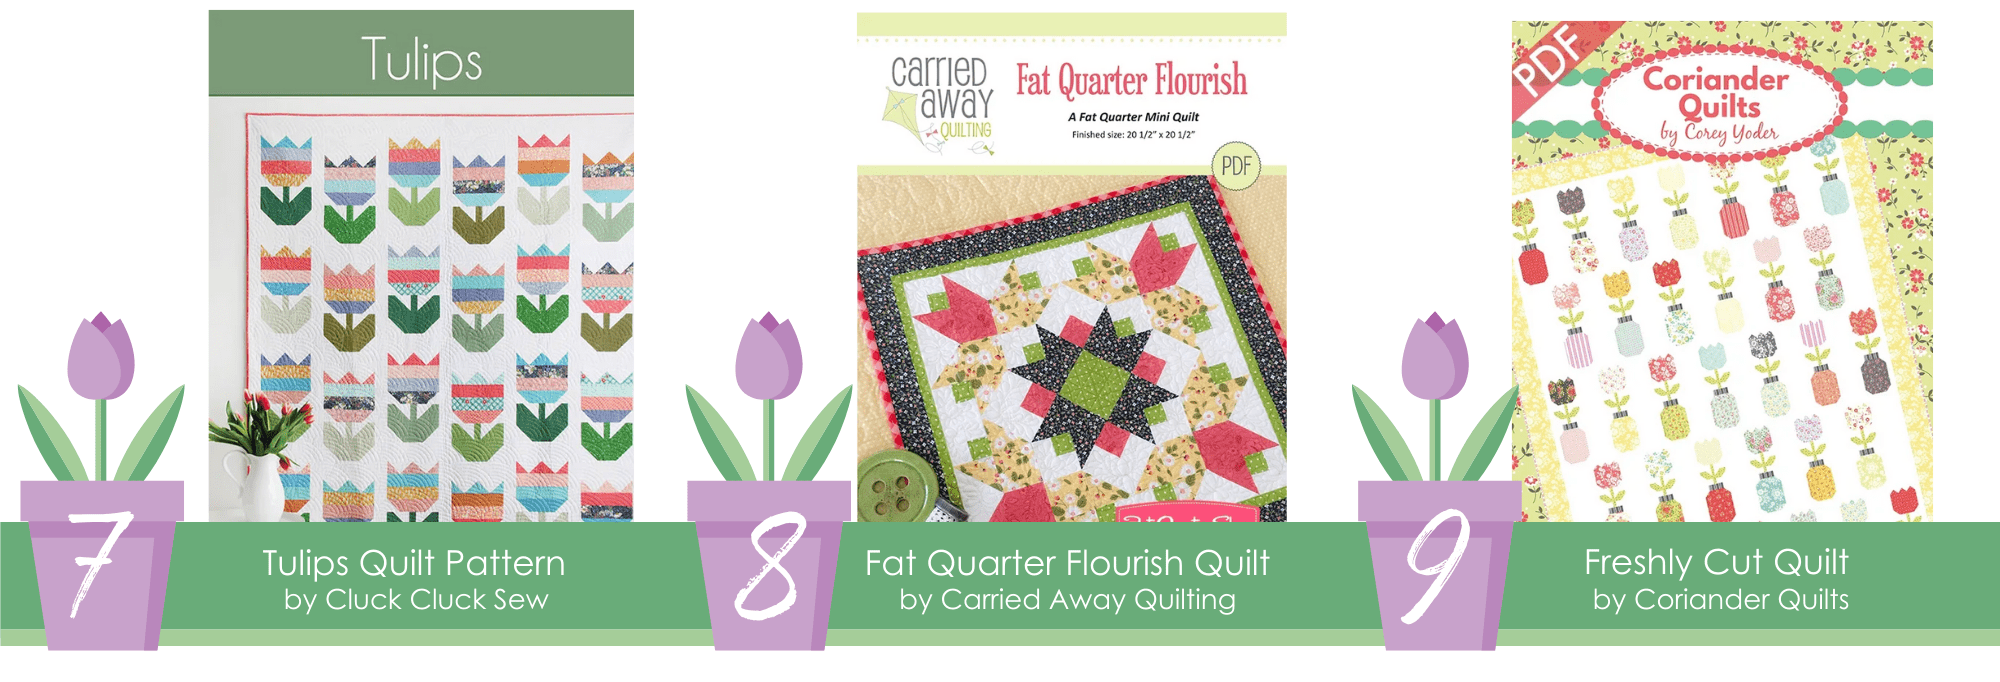 Tulip Quilt Patterns for Spring 6-9